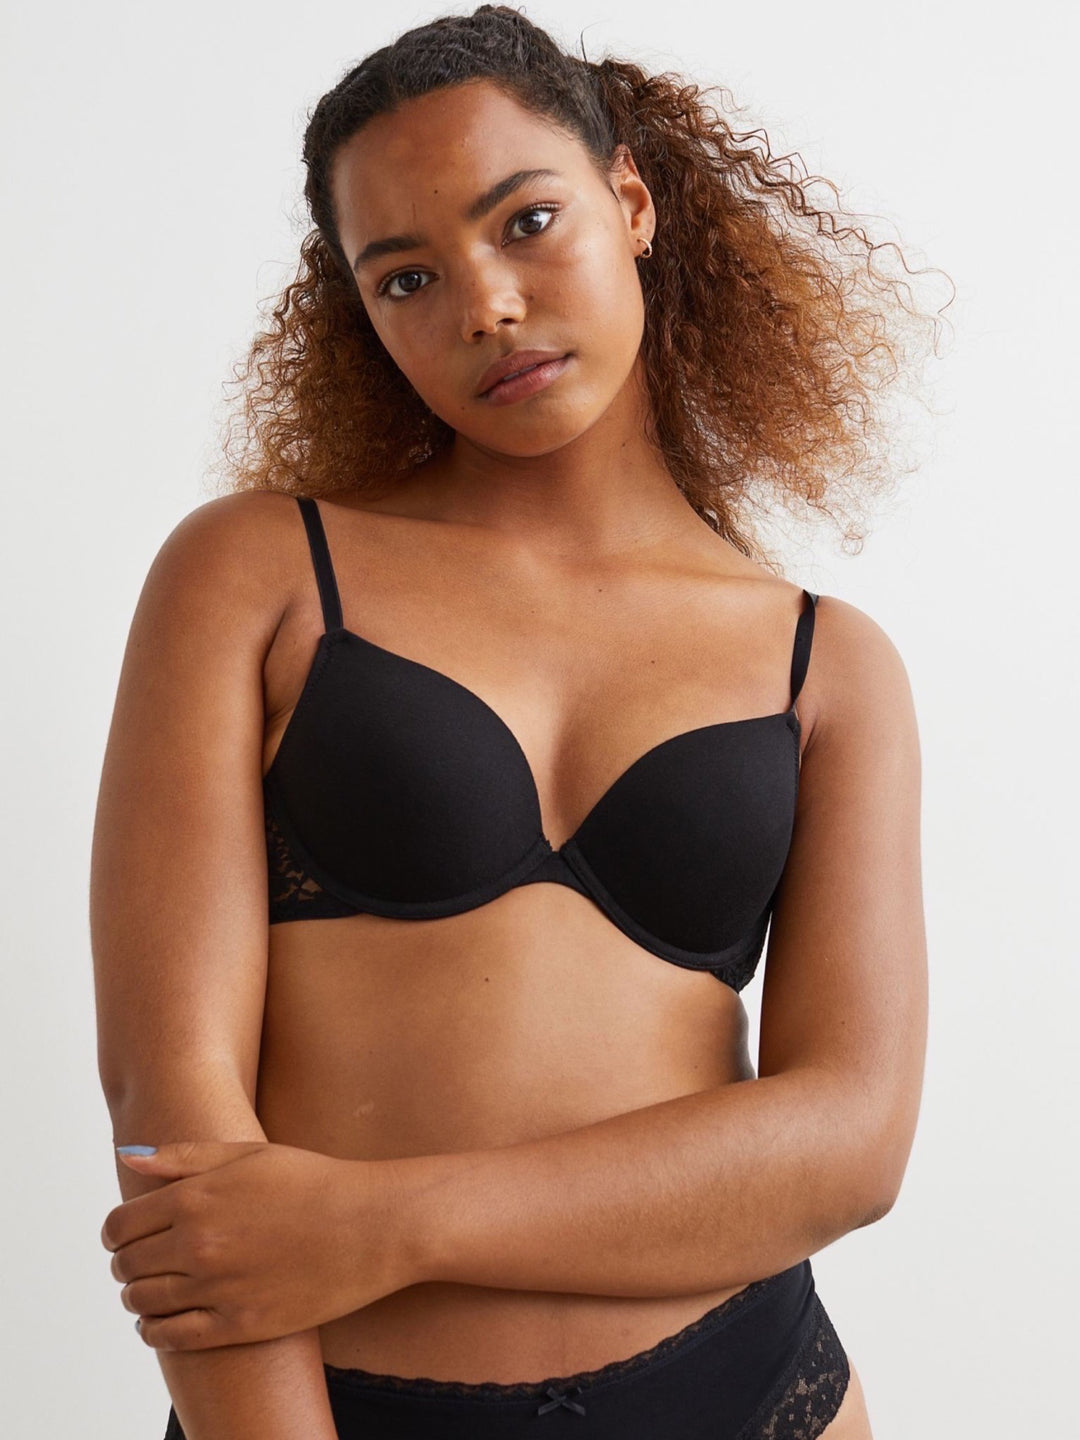 Lauma Lingerie Uganda - From our collection of classic bras, we give you;  💖A practical everyday soft cup bra. 💖 Quality and durable fabric. 💖Big  bra straps and 3 hooks. 💖 Beautiful